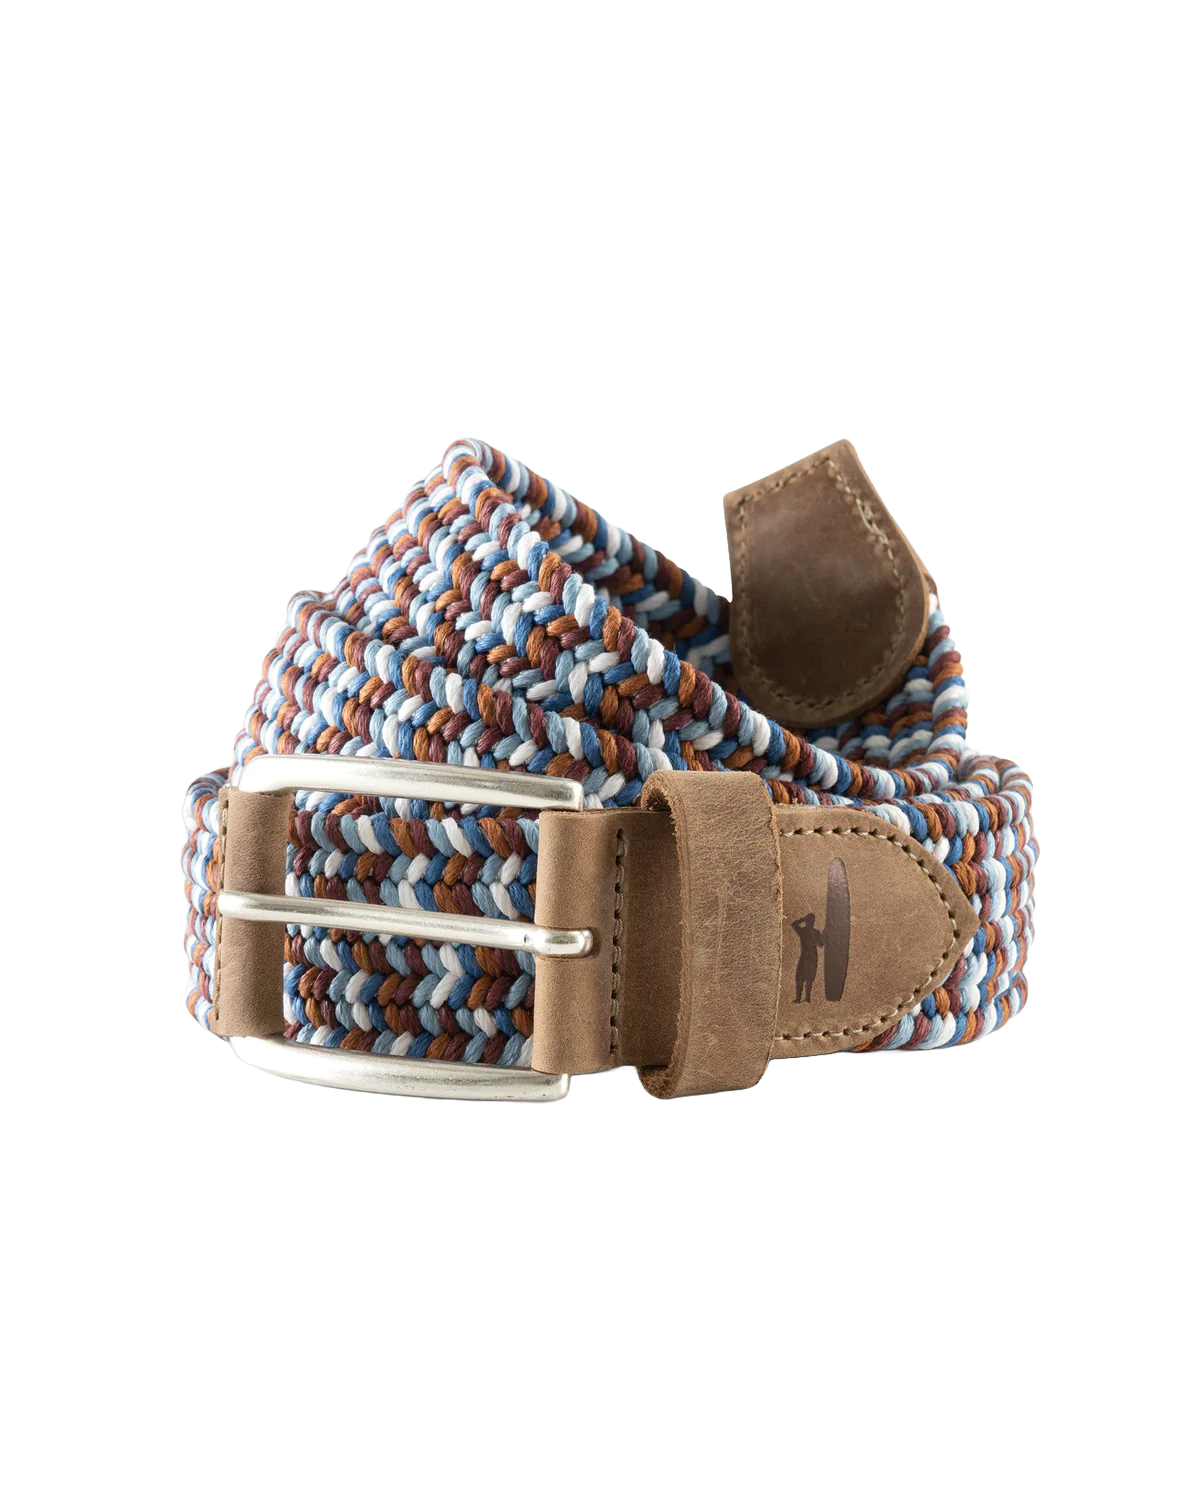 johnnie-O 10. GIFTS|ACCESSORIES - MENS ACCESSORIES - MENS BELTS Cotton Stretch Belt BROWN BLUE